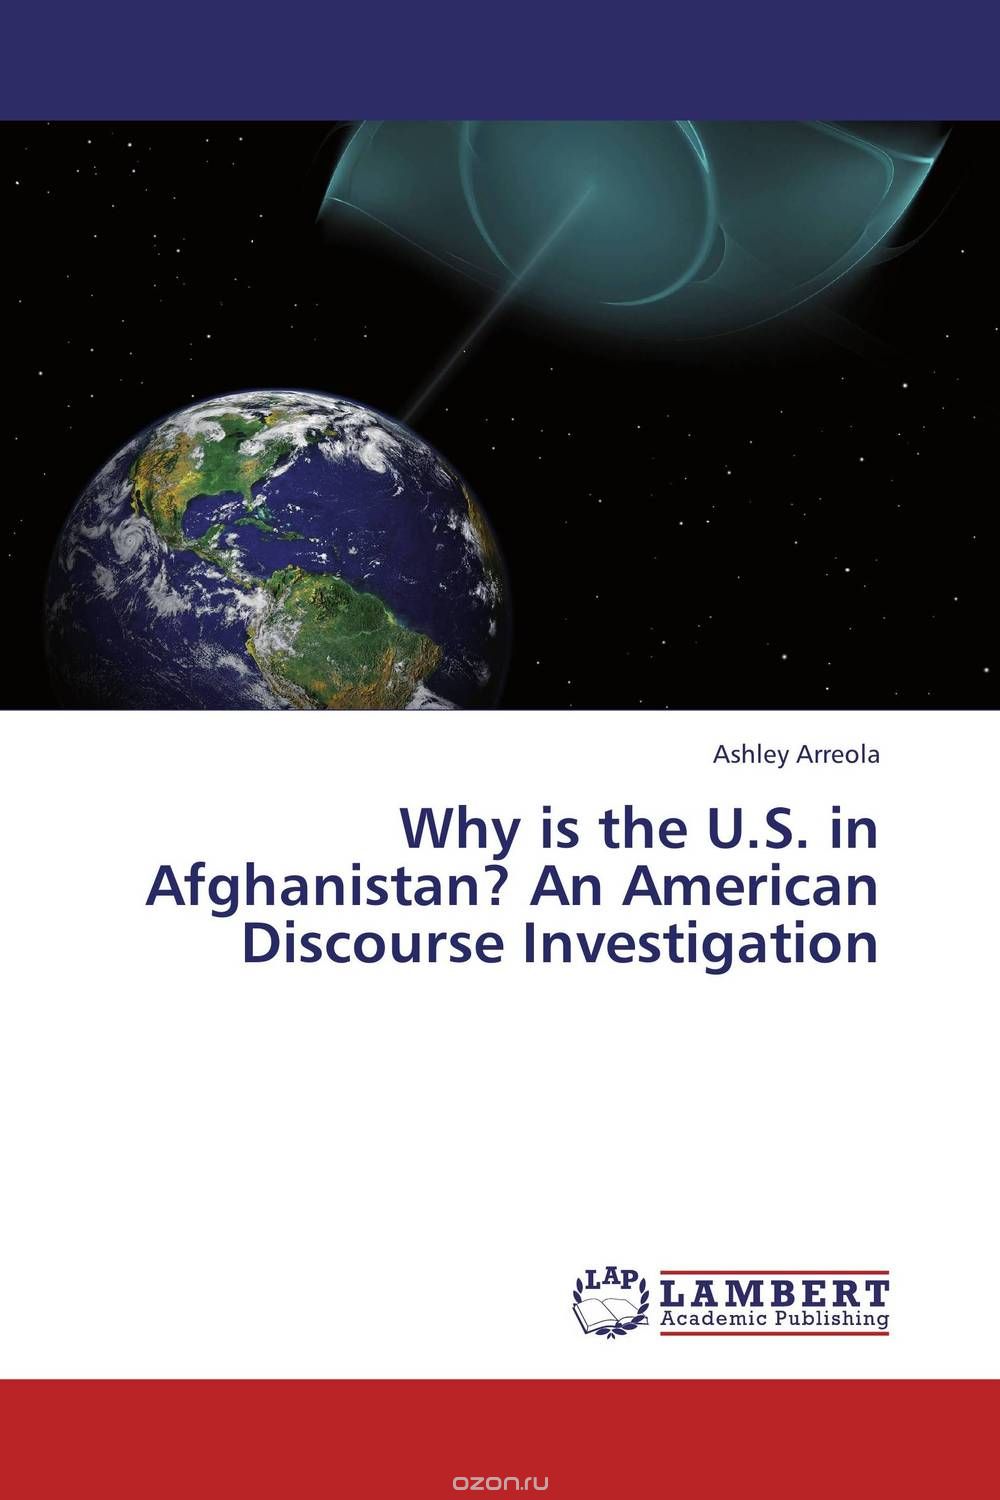 Why is the U.S. in Afghanistan? An American Discourse Investigation